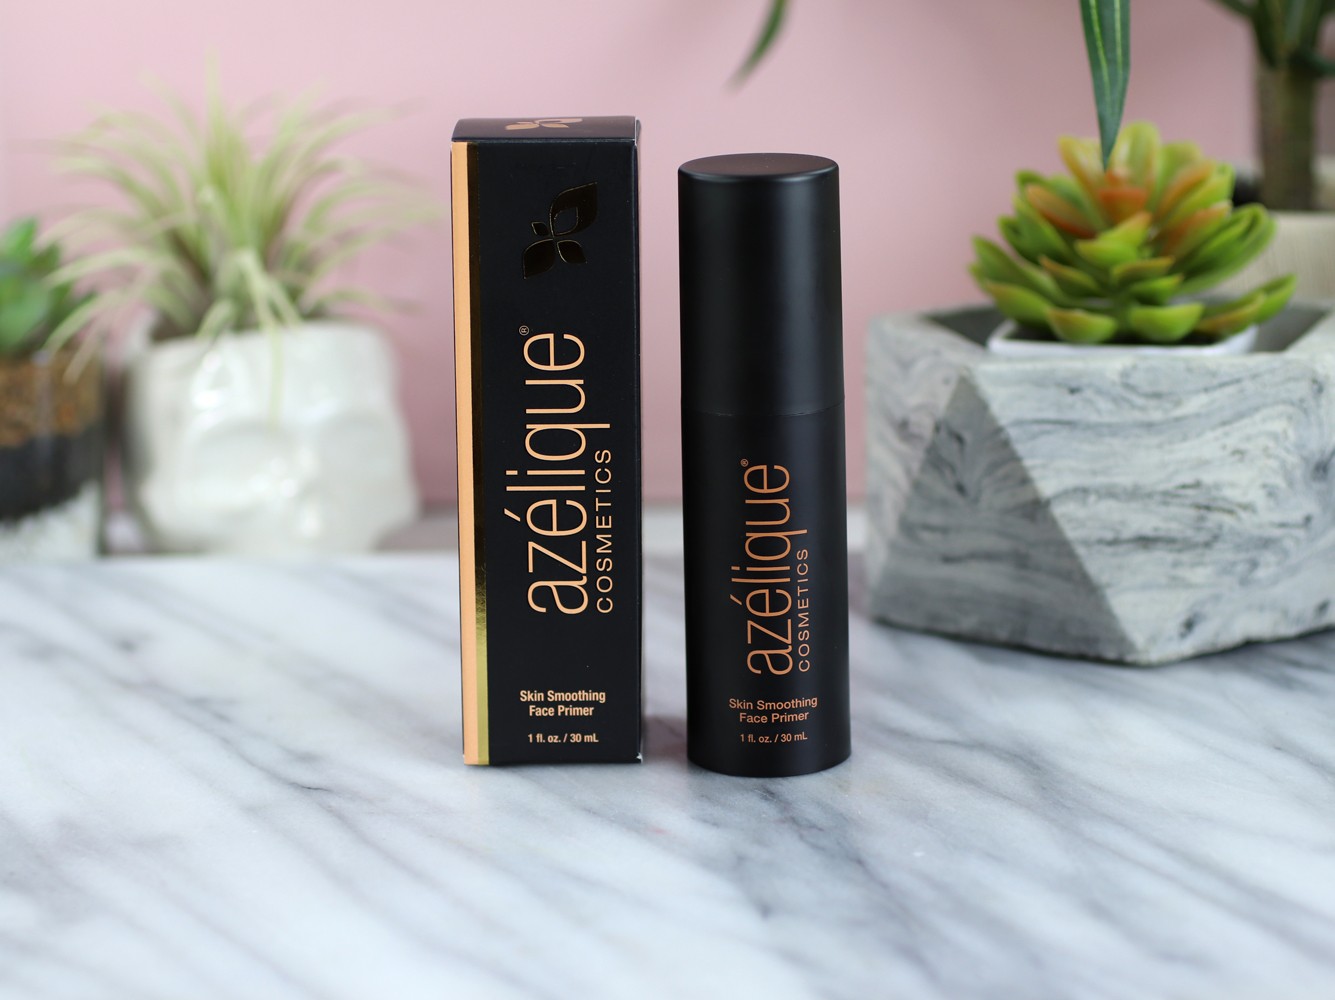 Azelique Cosmetics Primer Review - Review of Azelique Cosmetics by Los Angeles cruelty free beauty blogger My Beauty Bunny